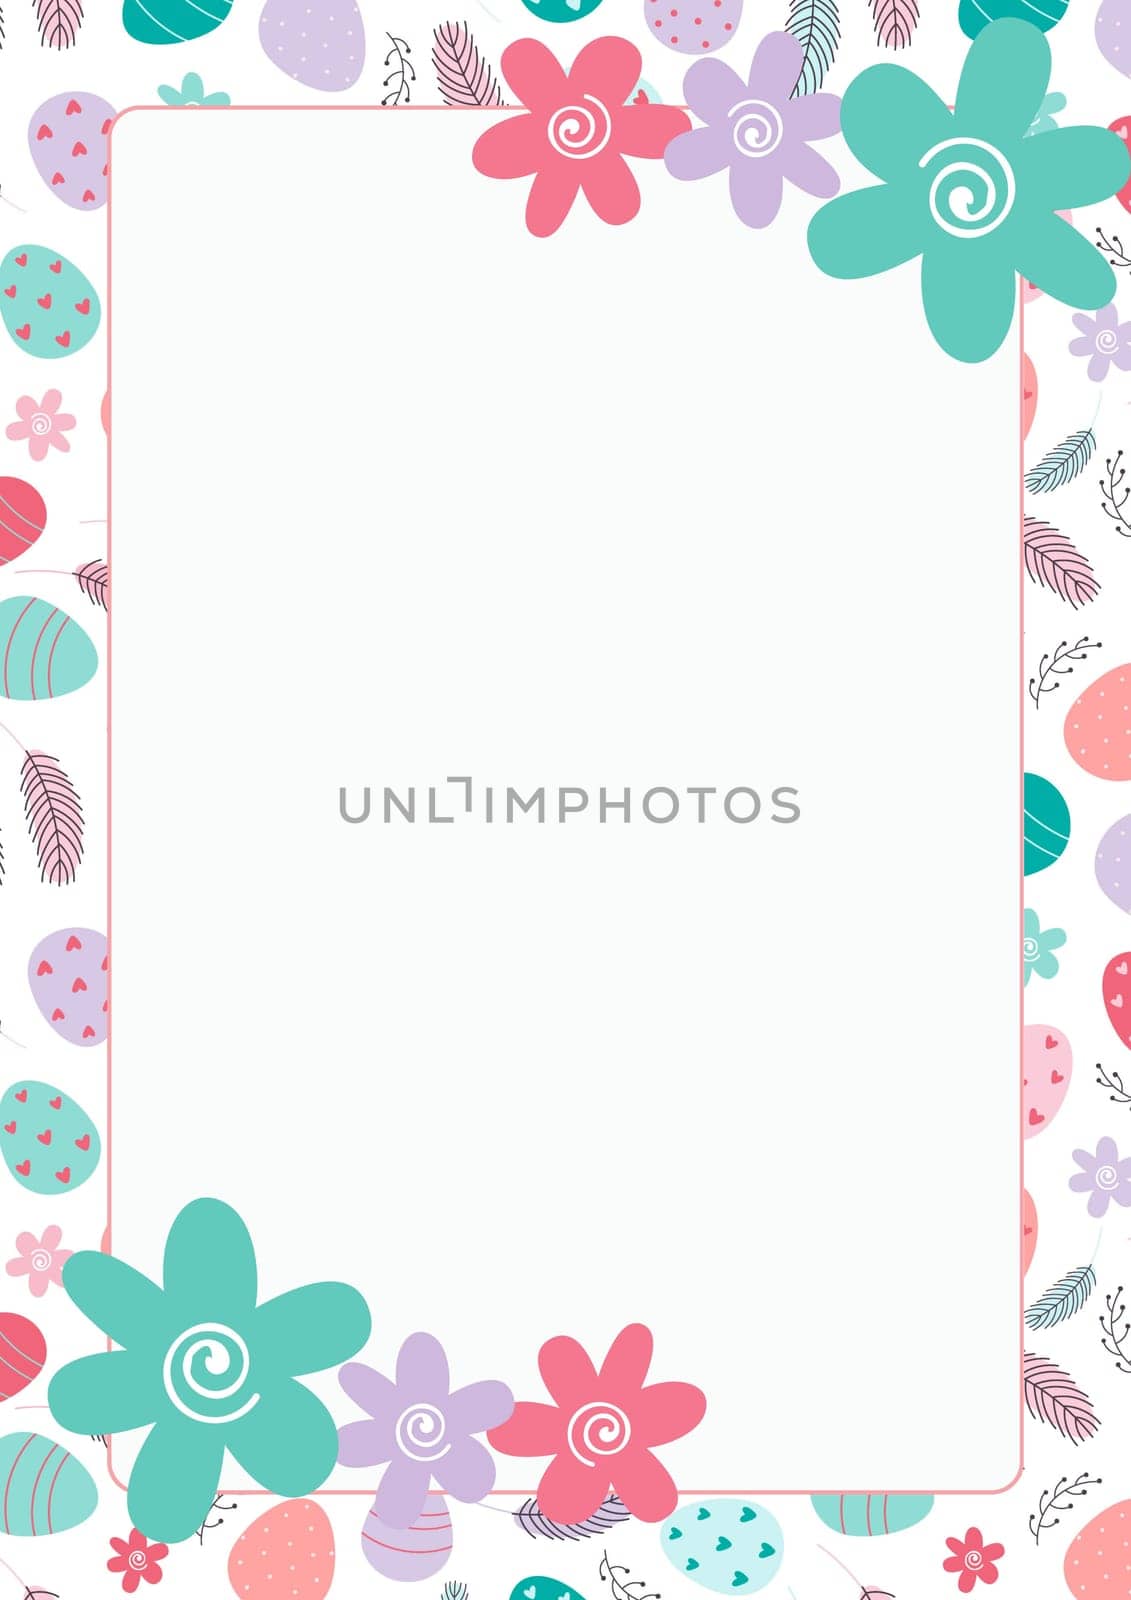 A colorful flowery background with a white frame. The flowers are pink, purple, and green